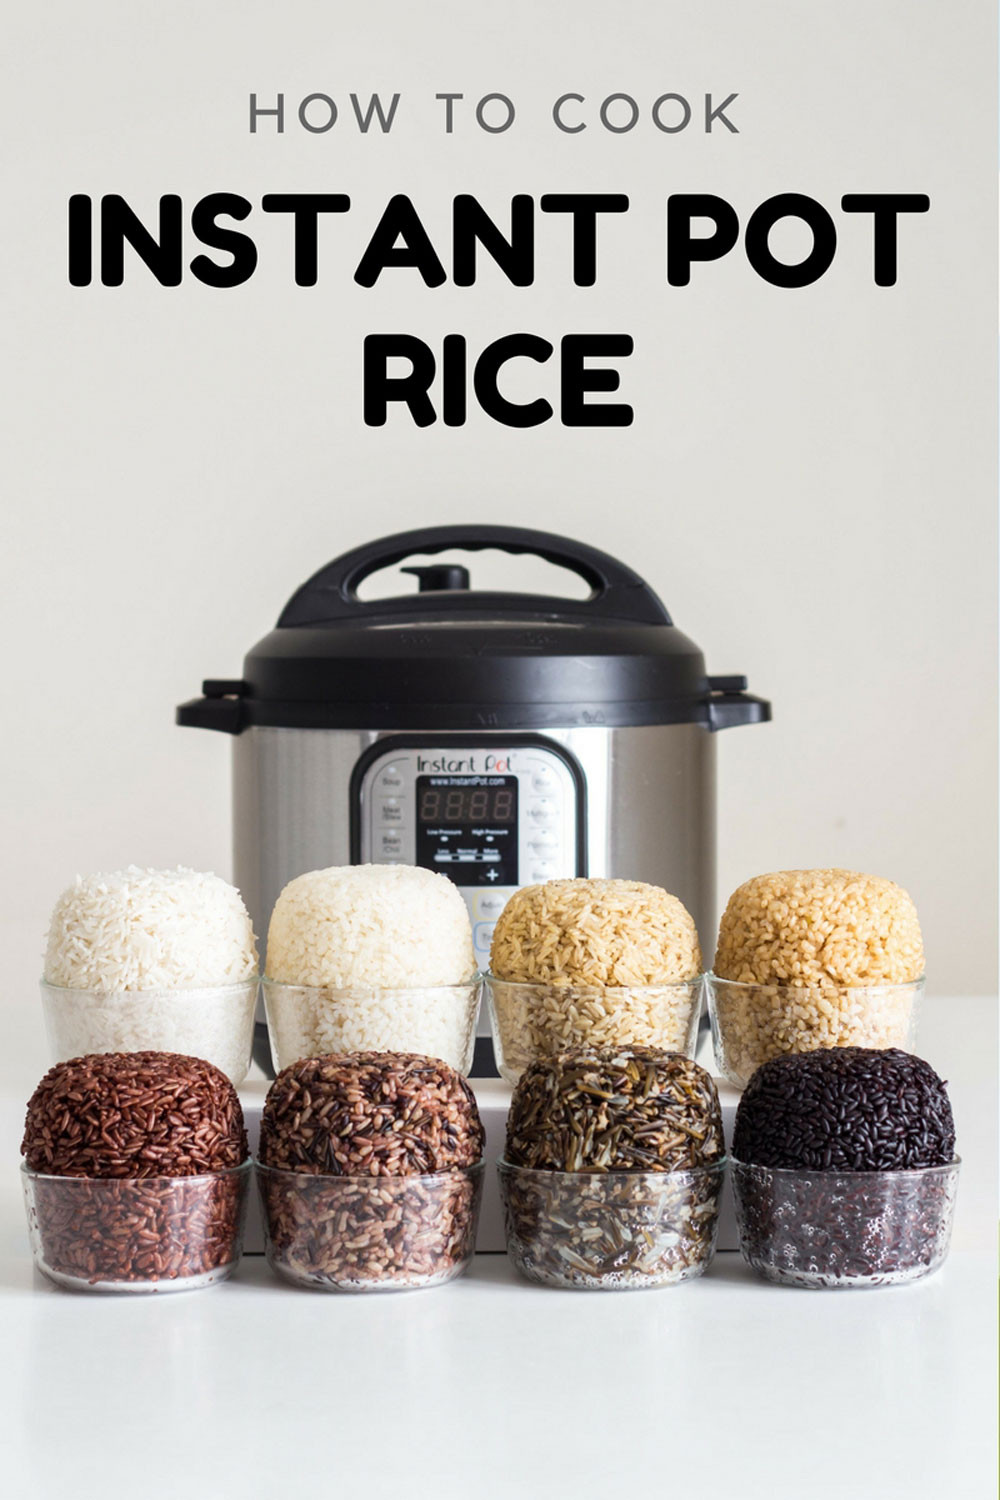 Wild Rice Instant Pot
 Failproof Instant Pot Rice Green Healthy Cooking